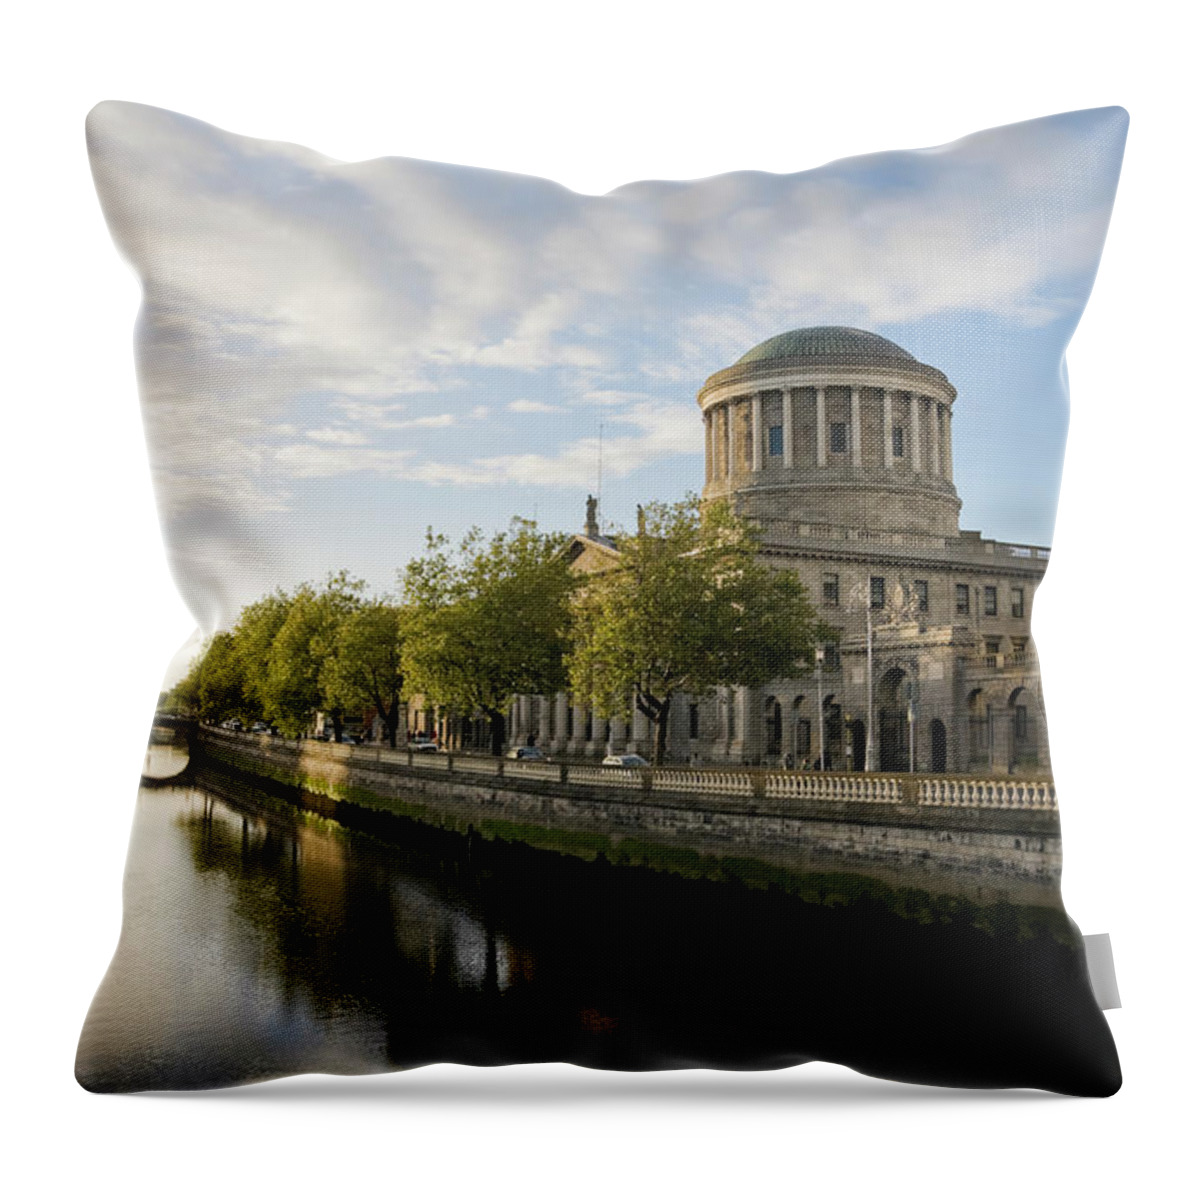 Dublin Throw Pillow featuring the photograph River Liffey And The Four Courts In by Lleerogers